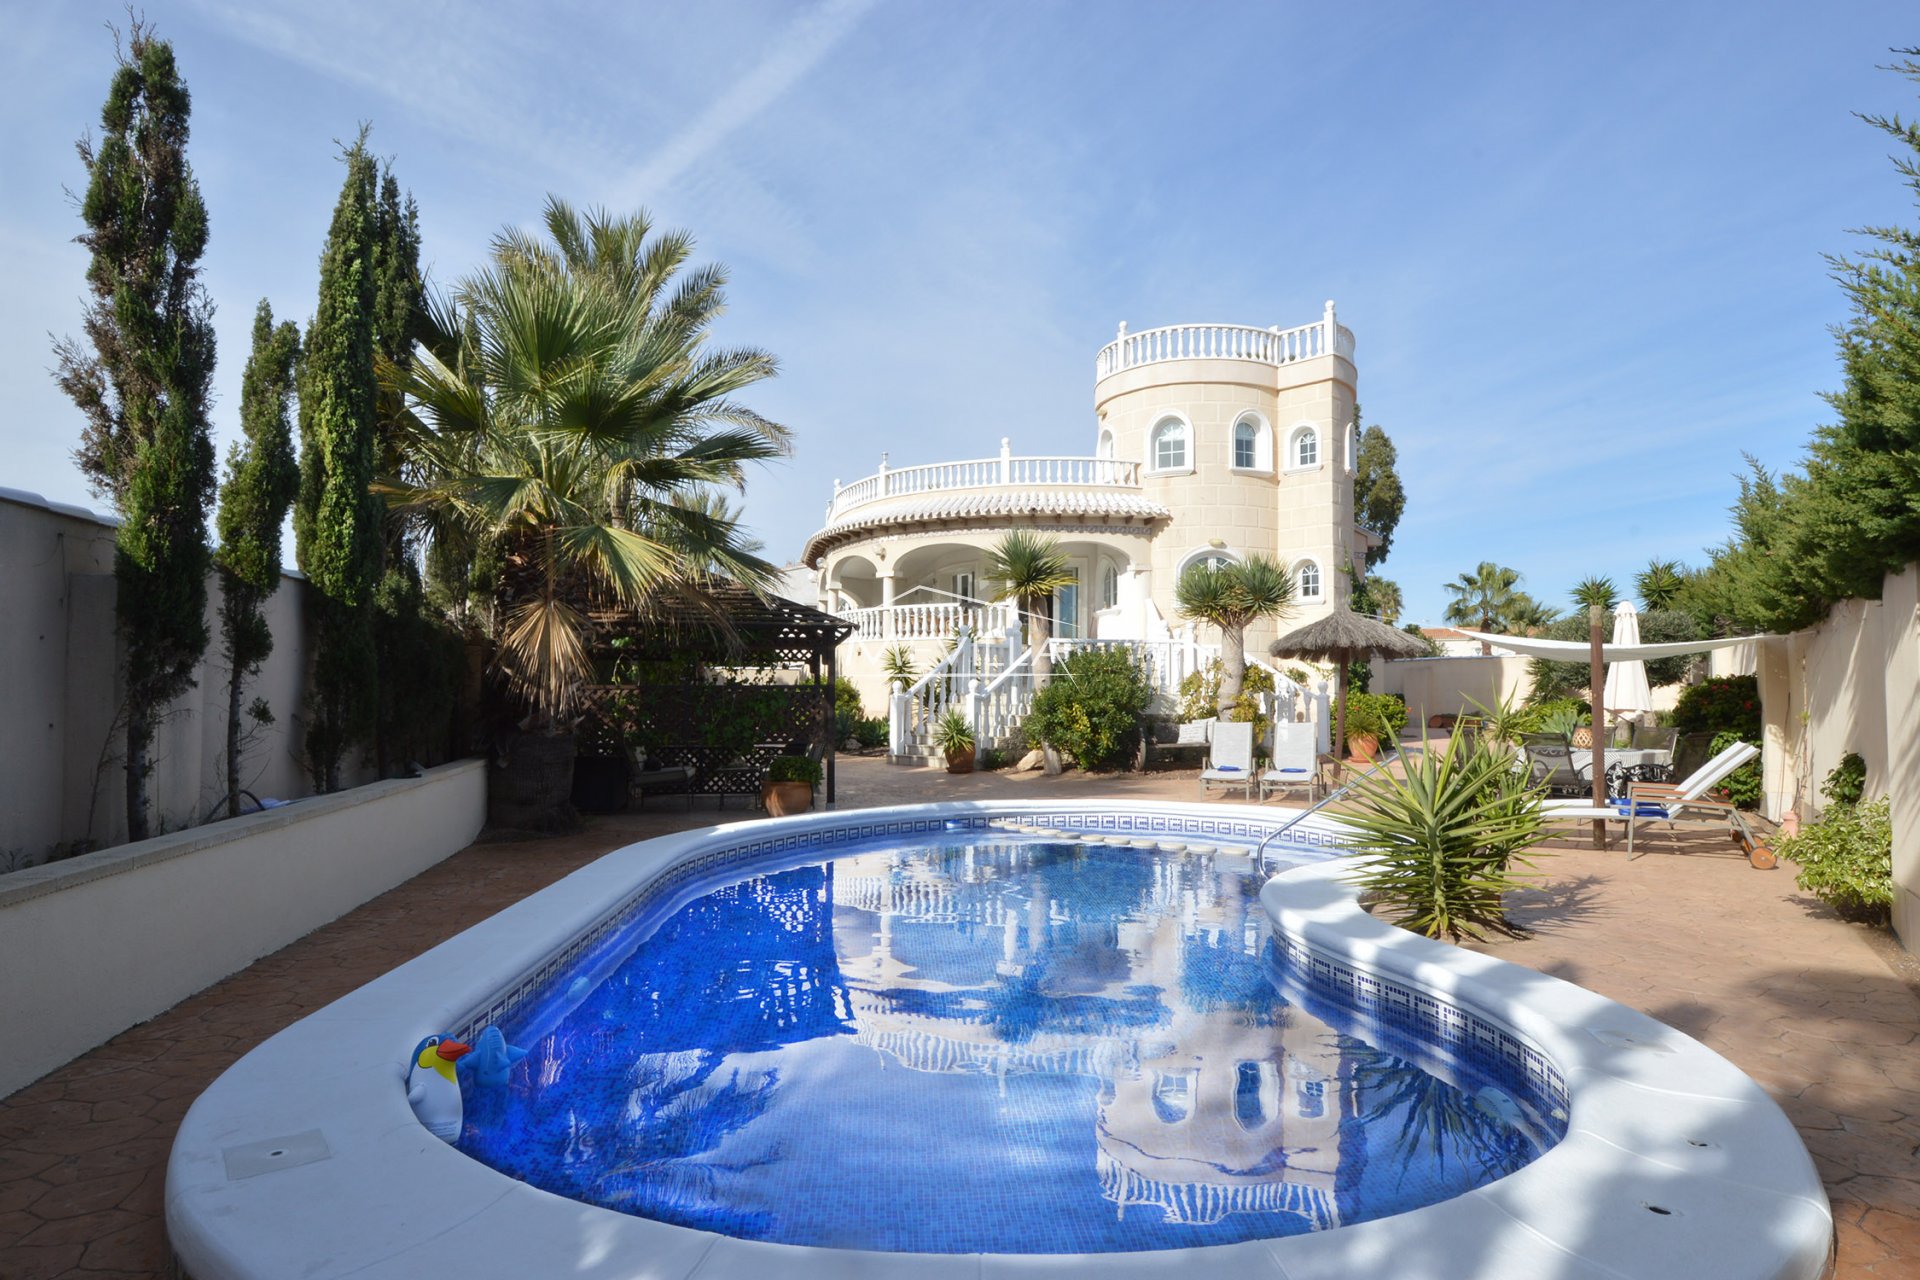 The villa with a private swimming pool 